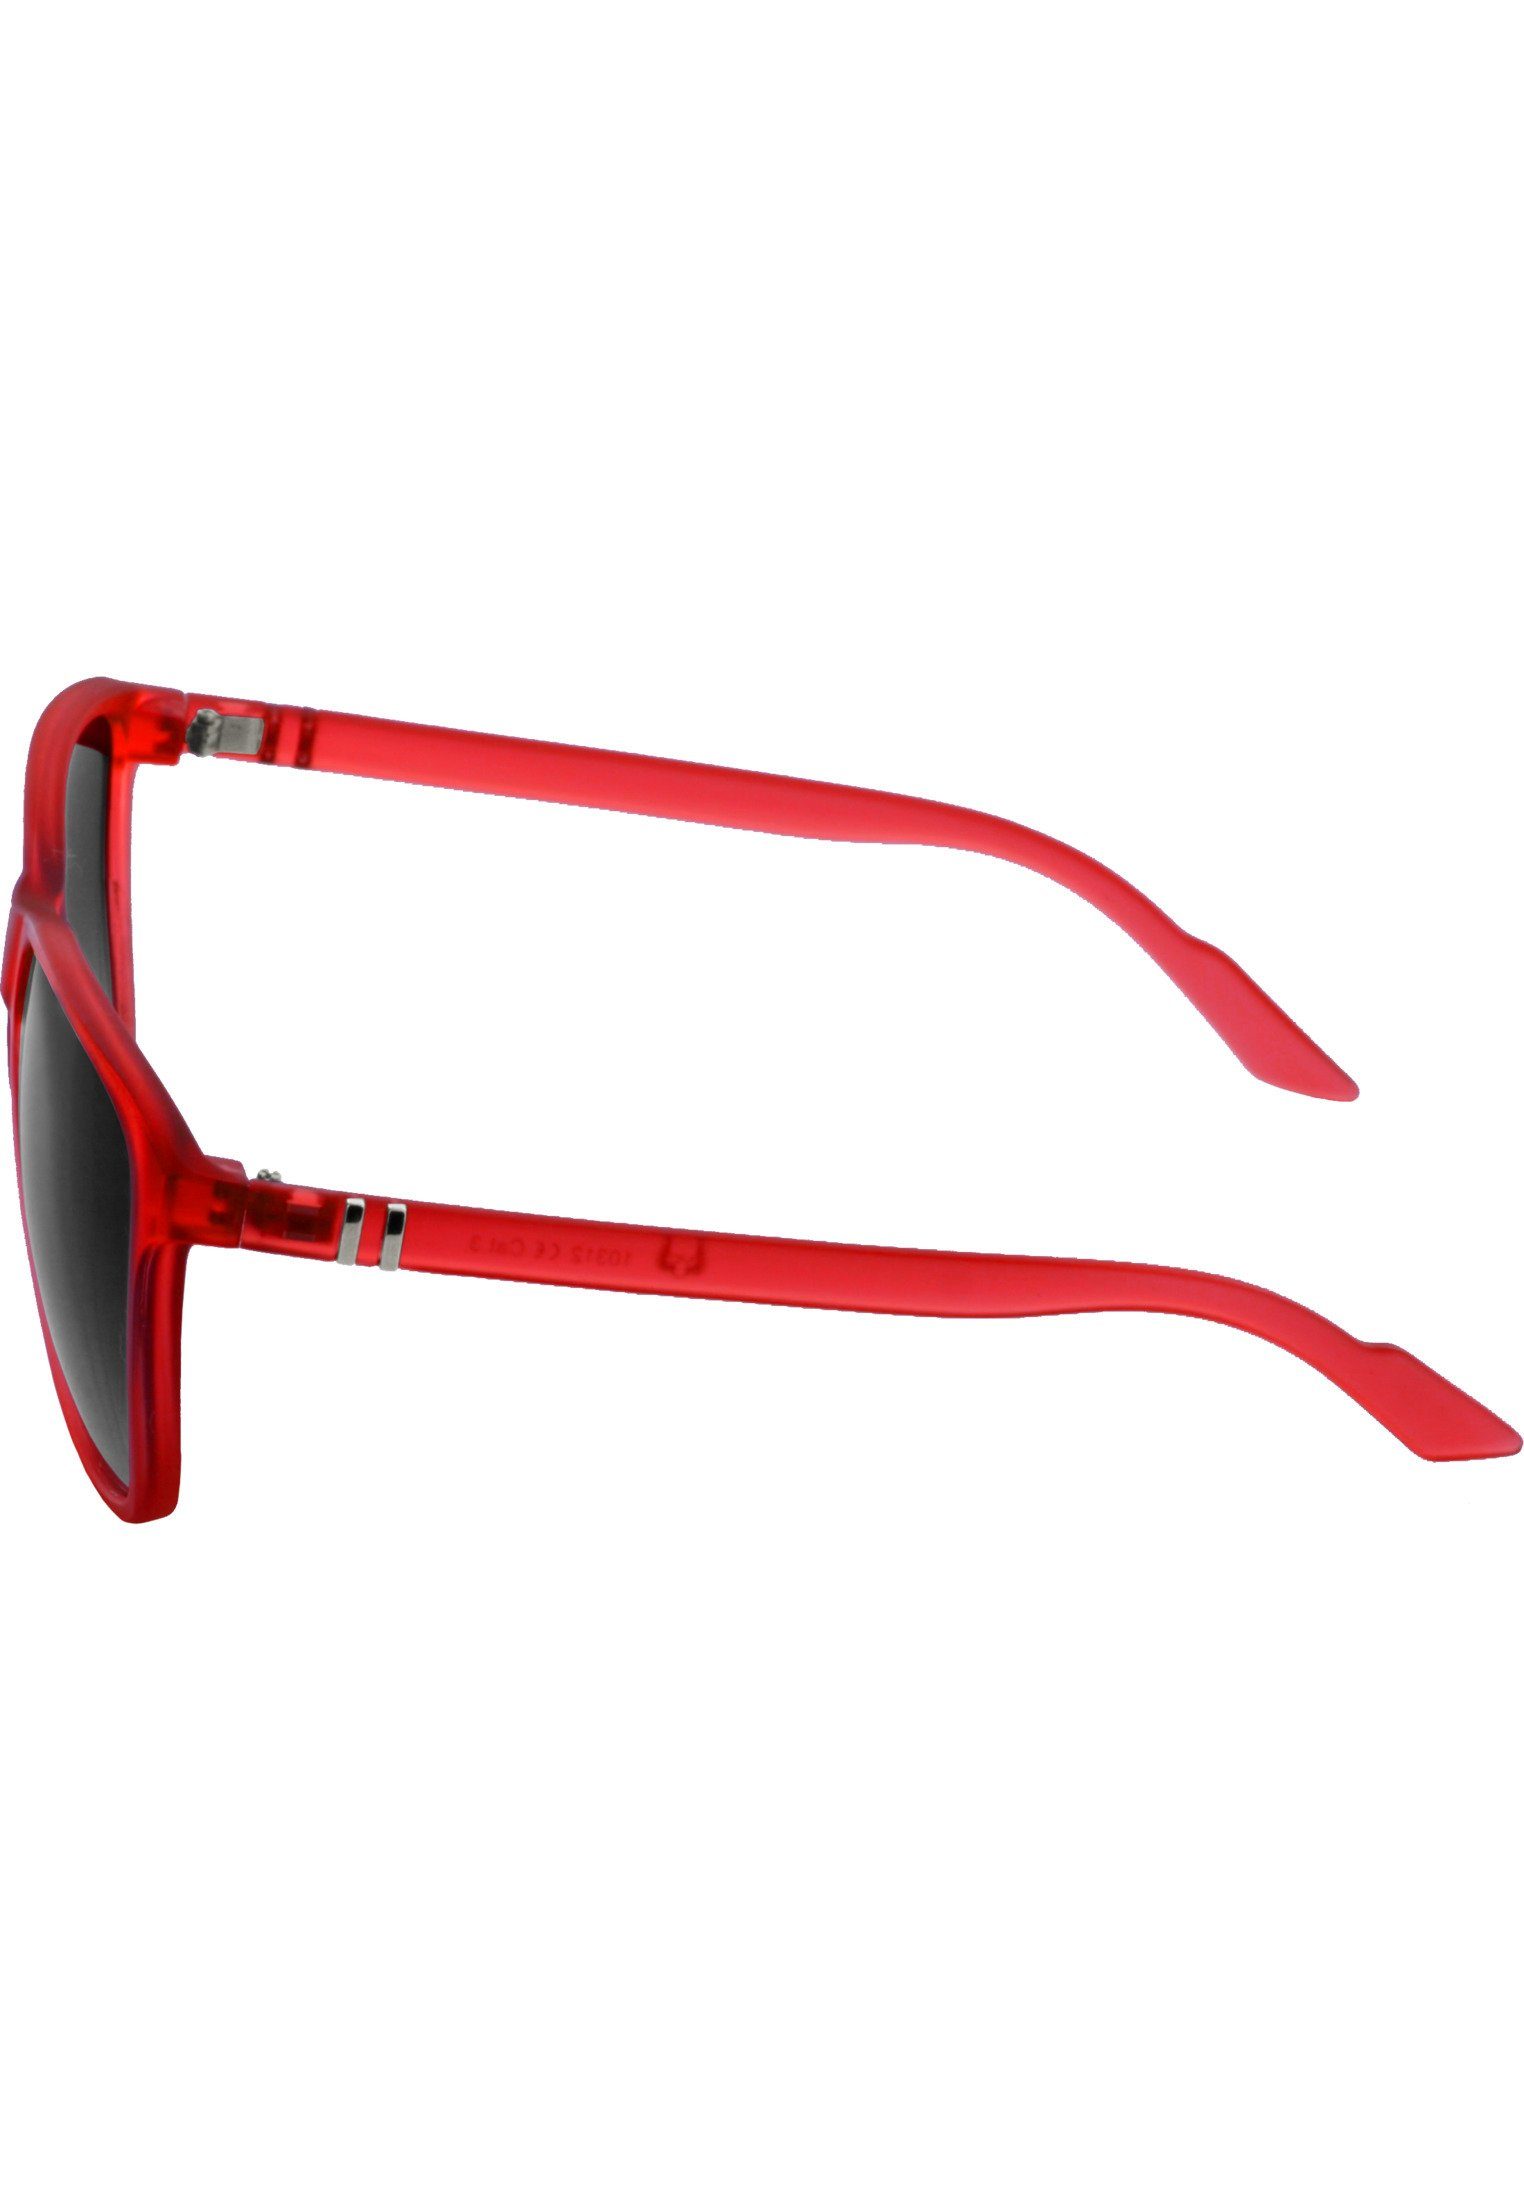 Sunglasses MSTRDS Chirwa Sonnenbrille red Accessoires